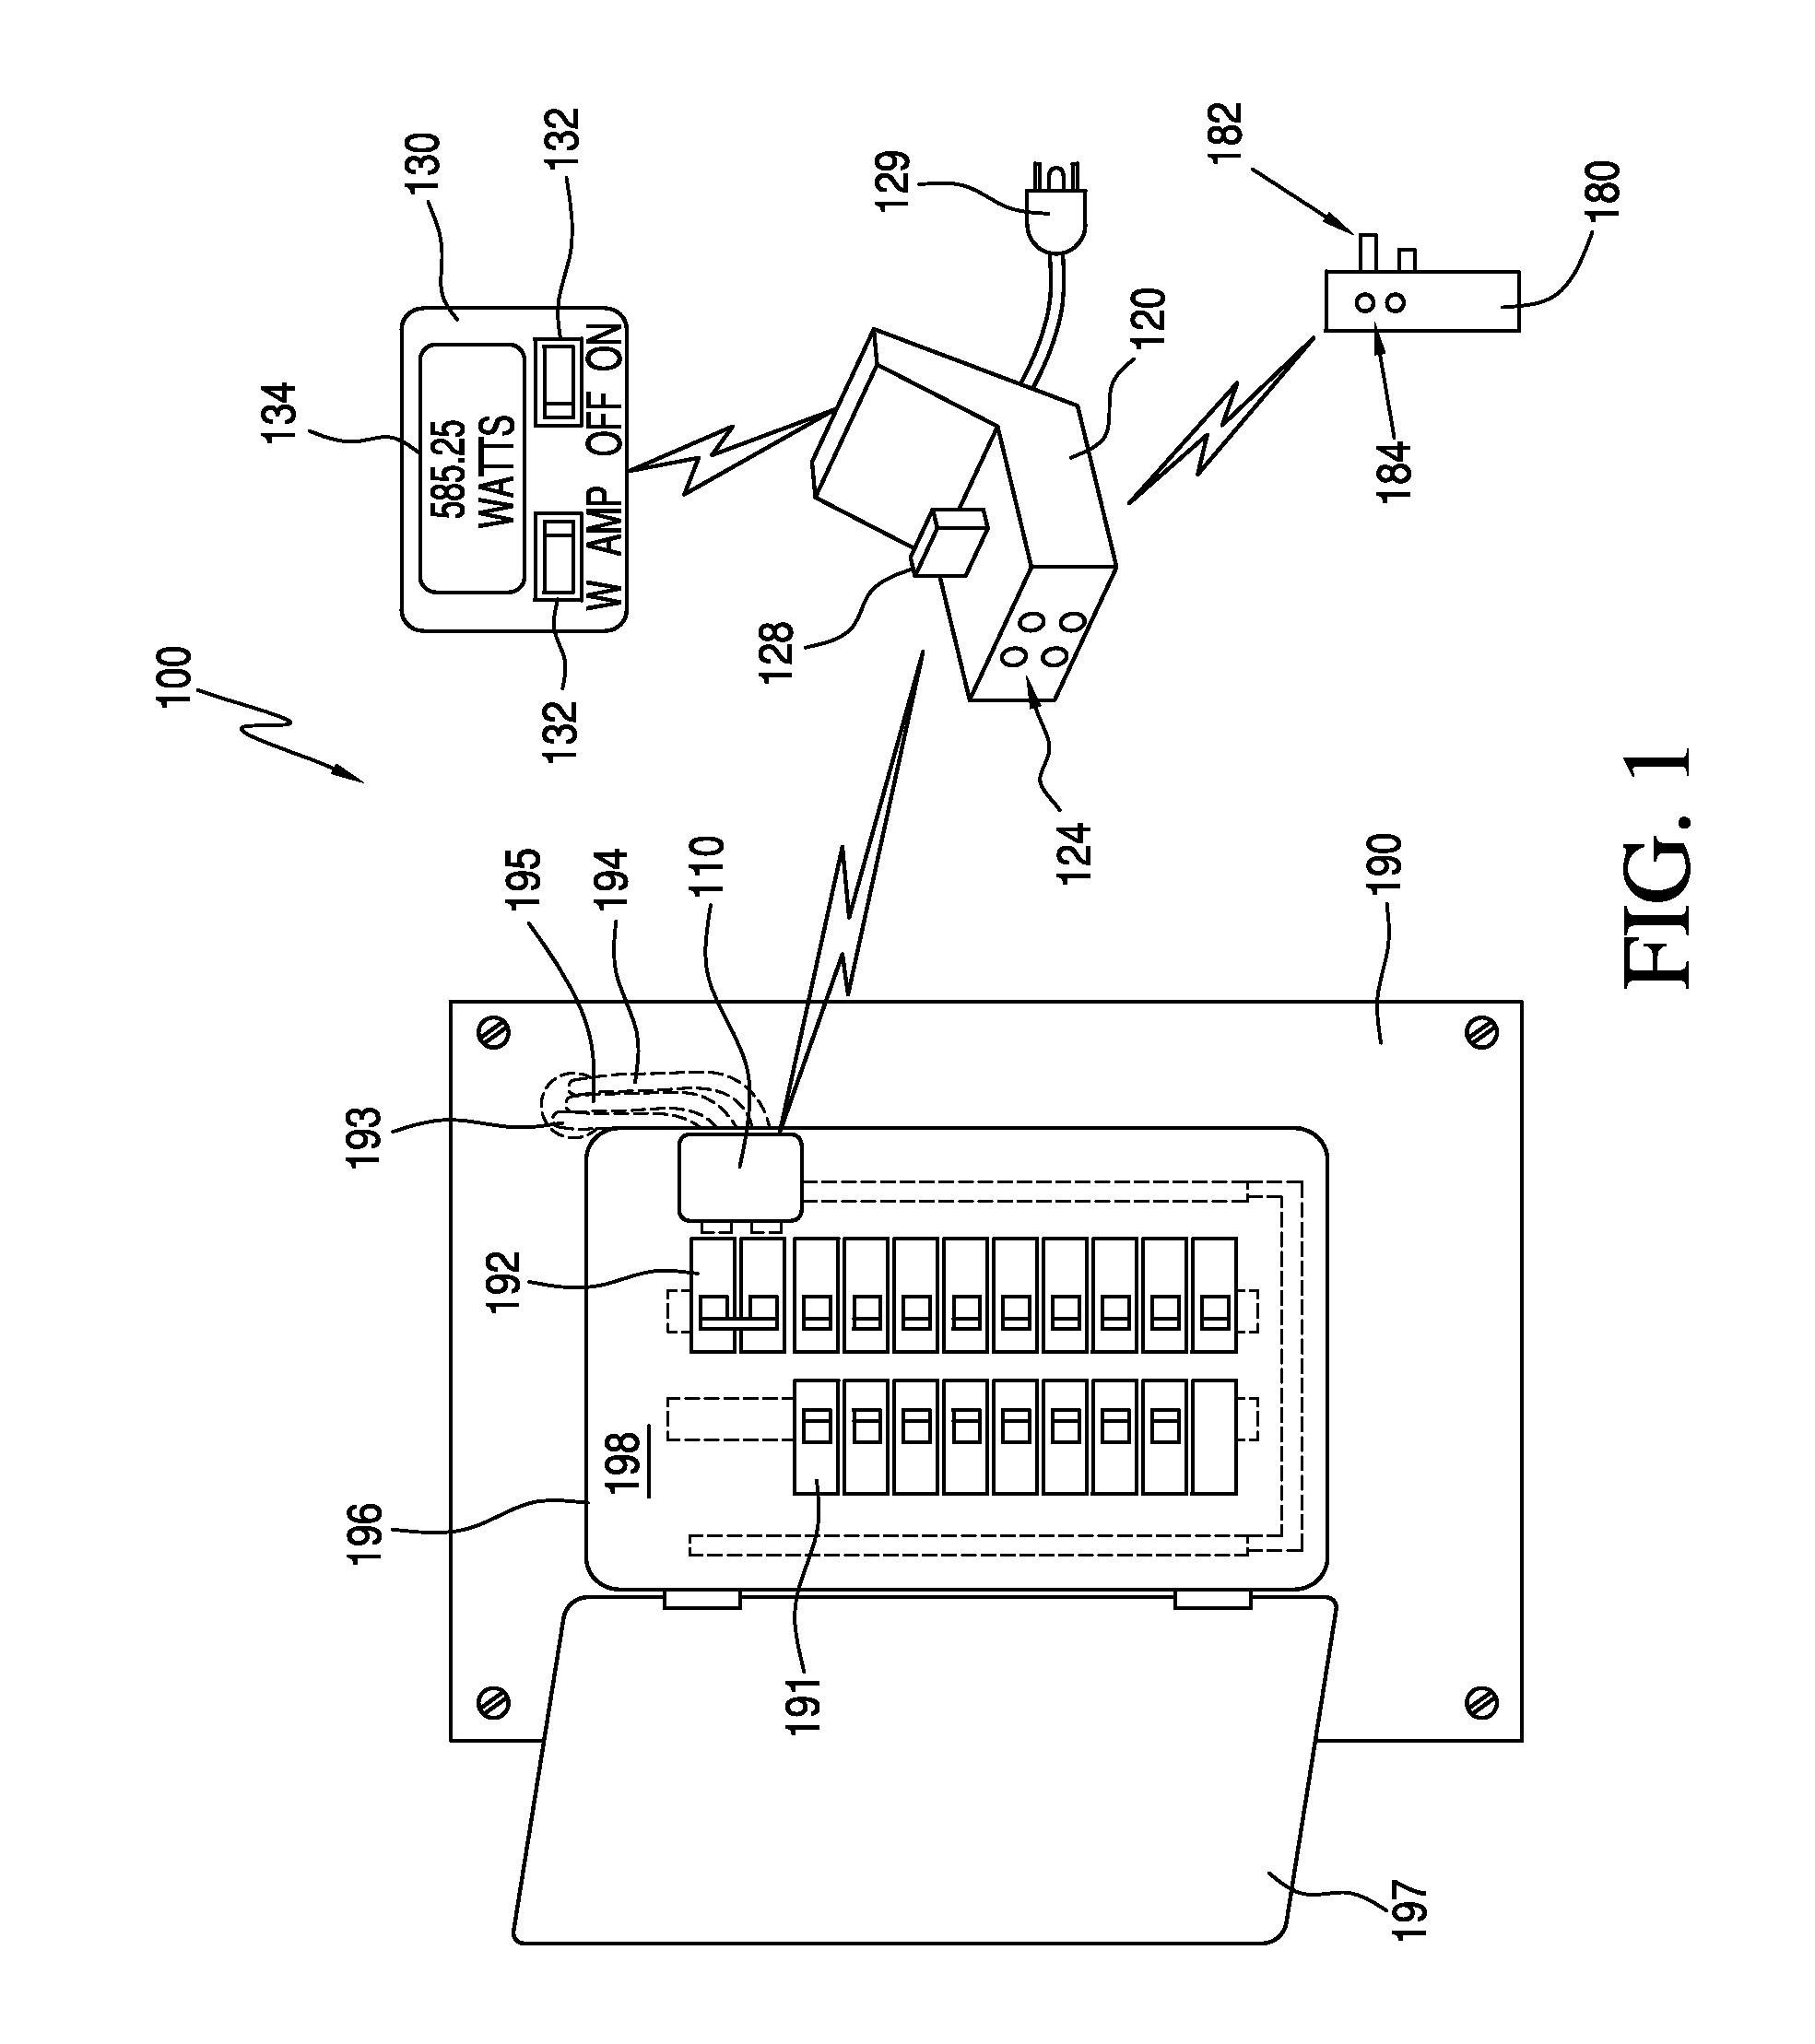 System for Monitoring Electrical Power Usage of a Structure and Method of Same